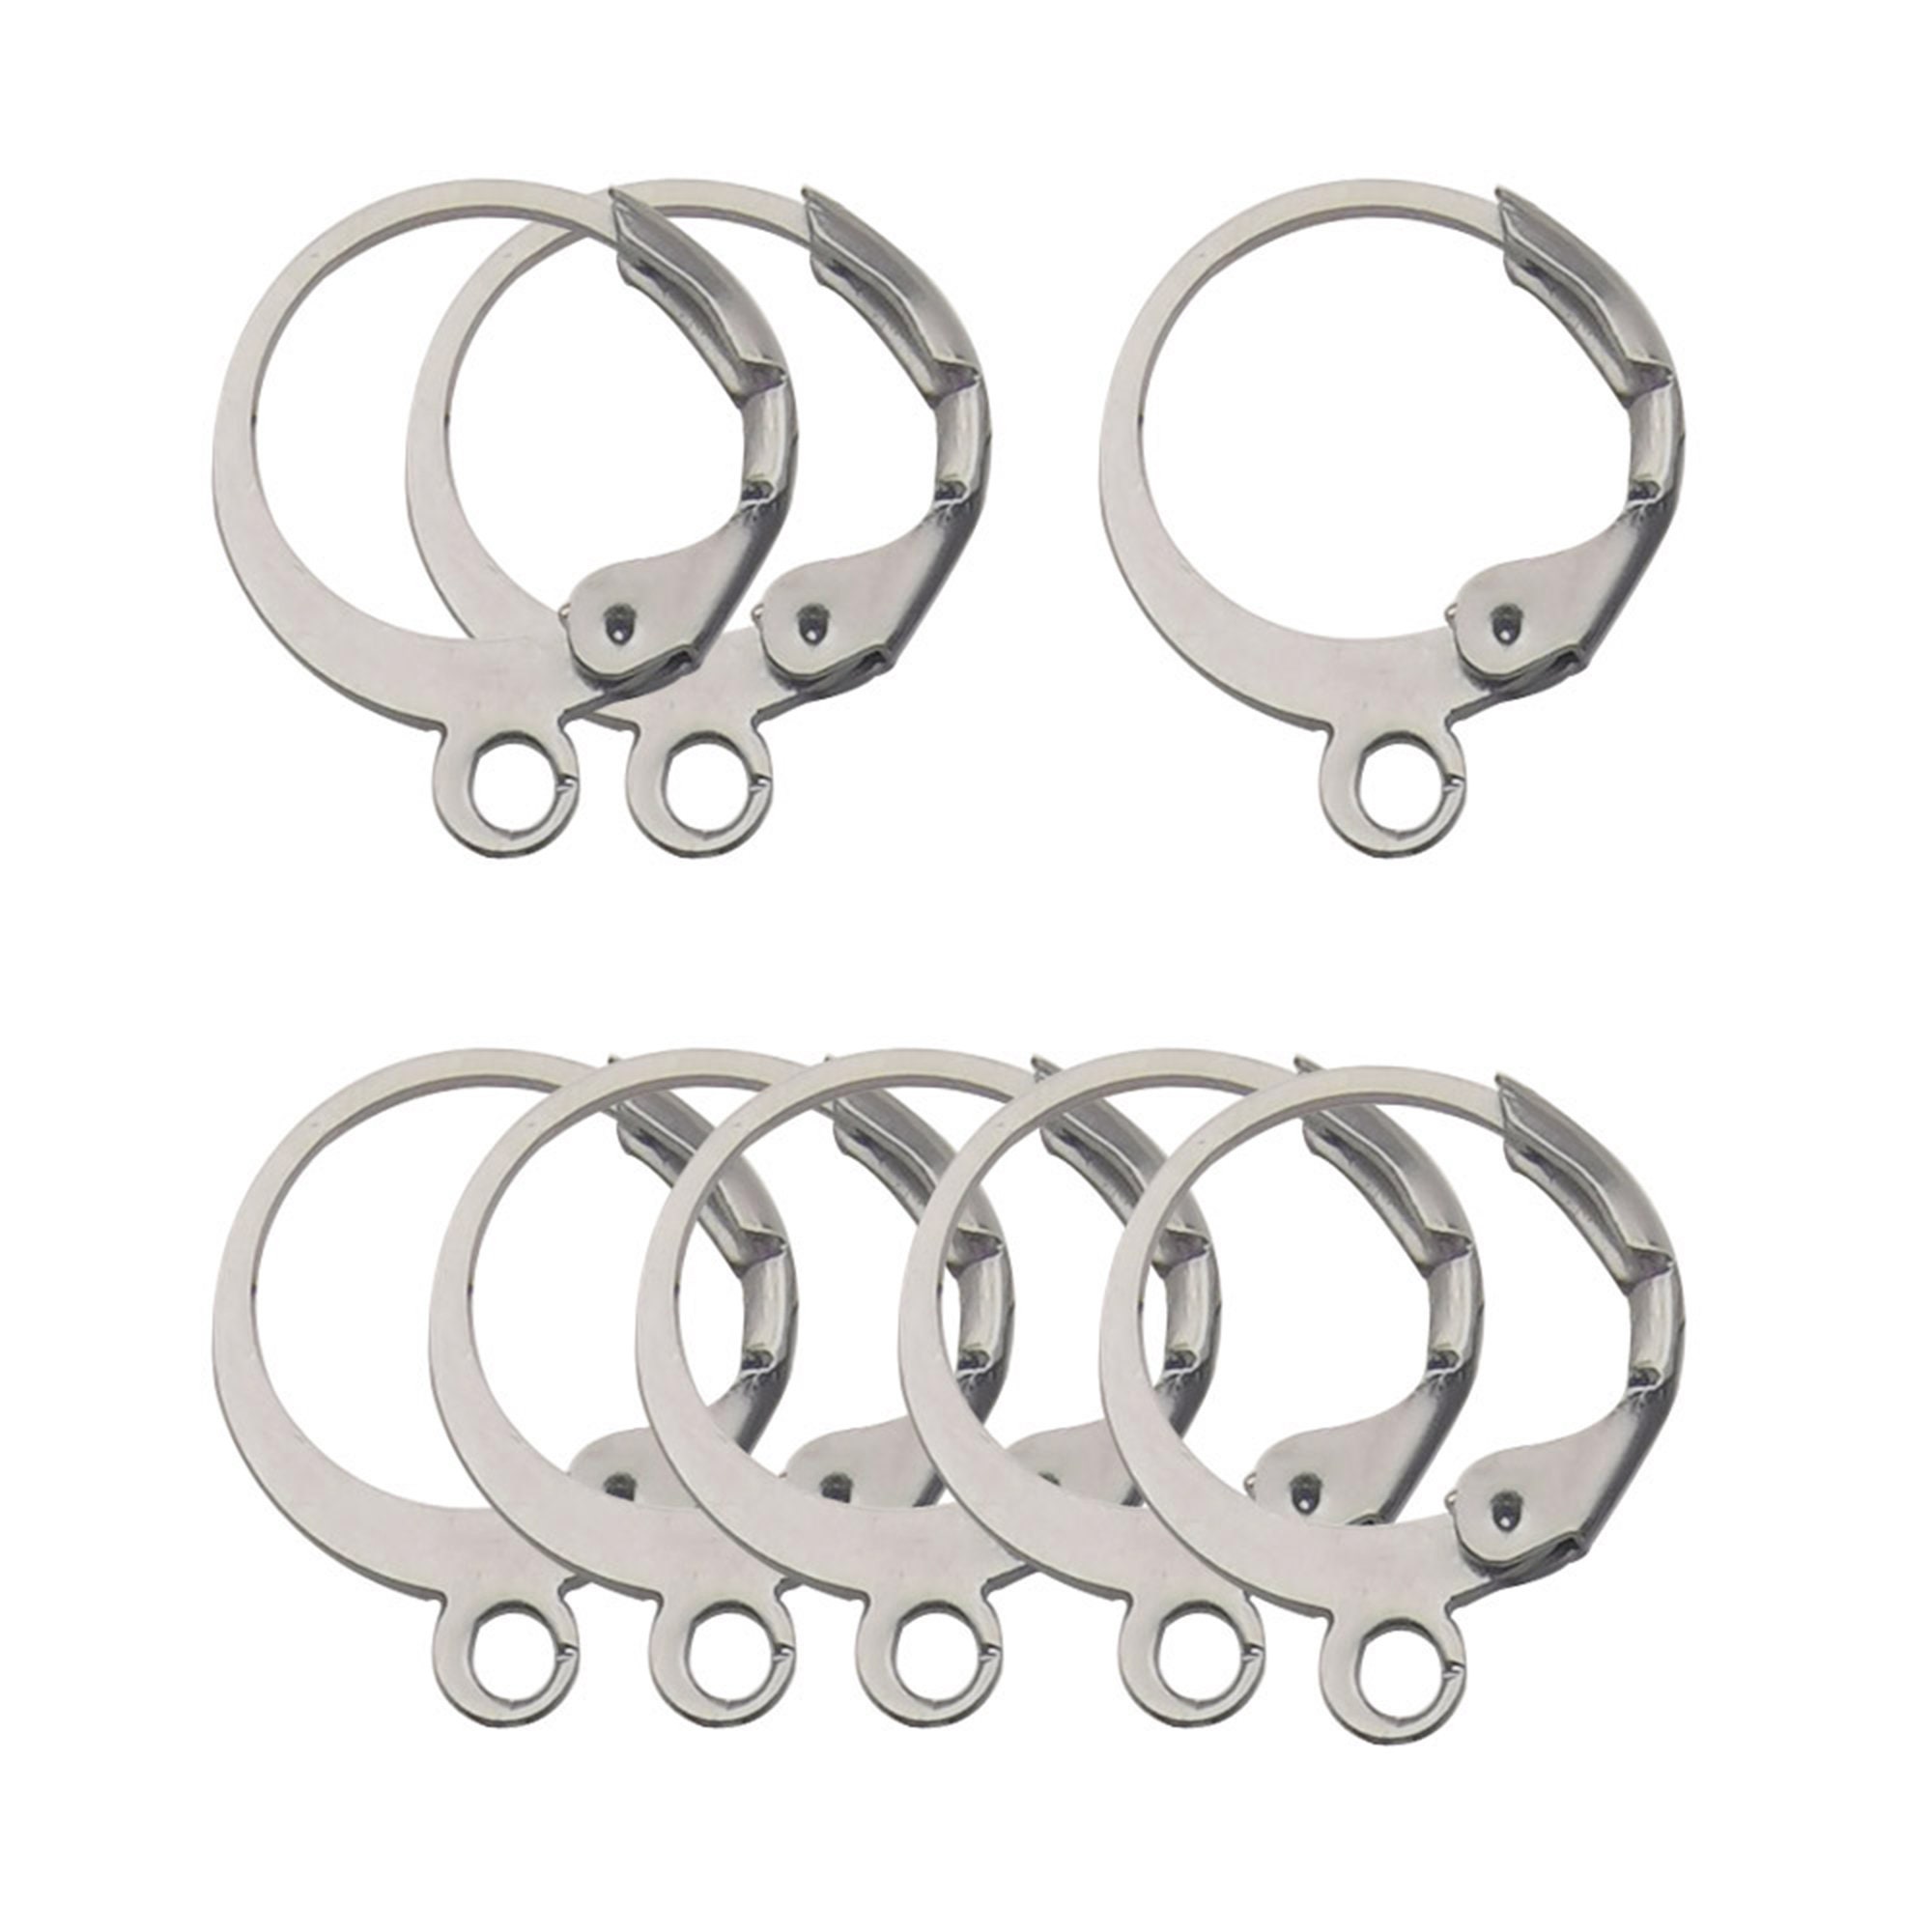 High Quality Stainless Steel Earring Findings With Clasps And Airflow Hooks  Never Fading DIY Jewelry Making Accessories By Dhgarden Otzuj From  Dh_garden, $4.27